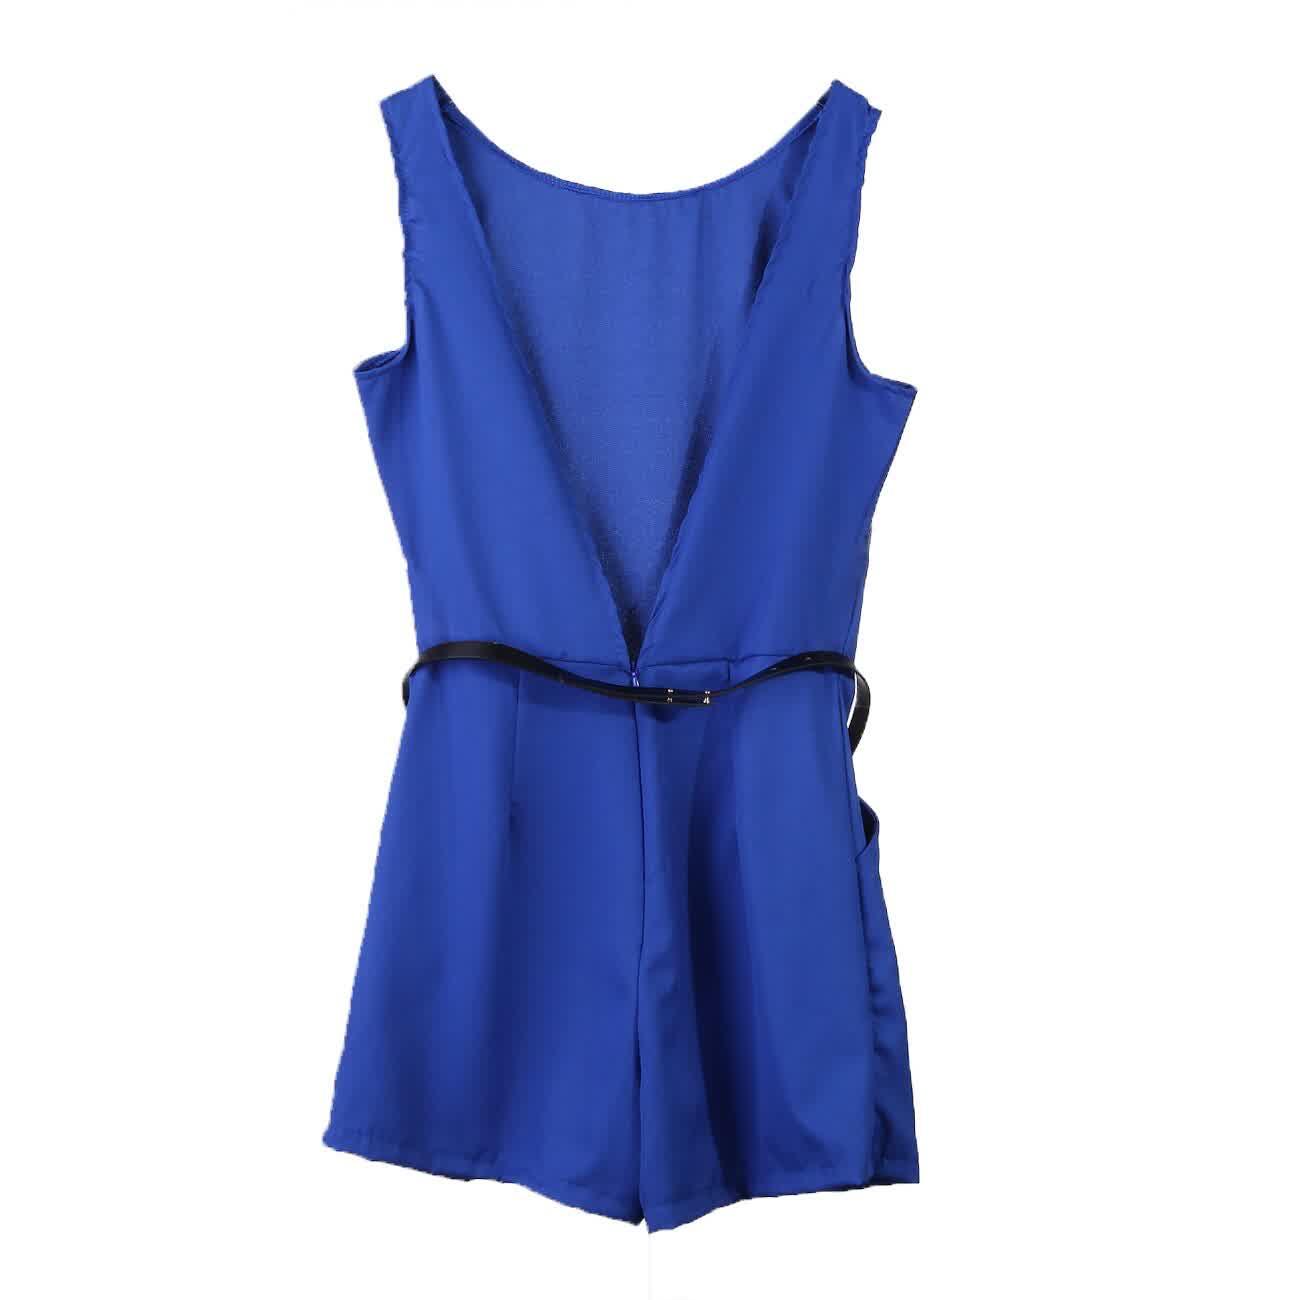  Office Lady Casual Jumpsuit Women Sleeveless Pockets Backless Playsuits Overalls Rompers Clothes for Women